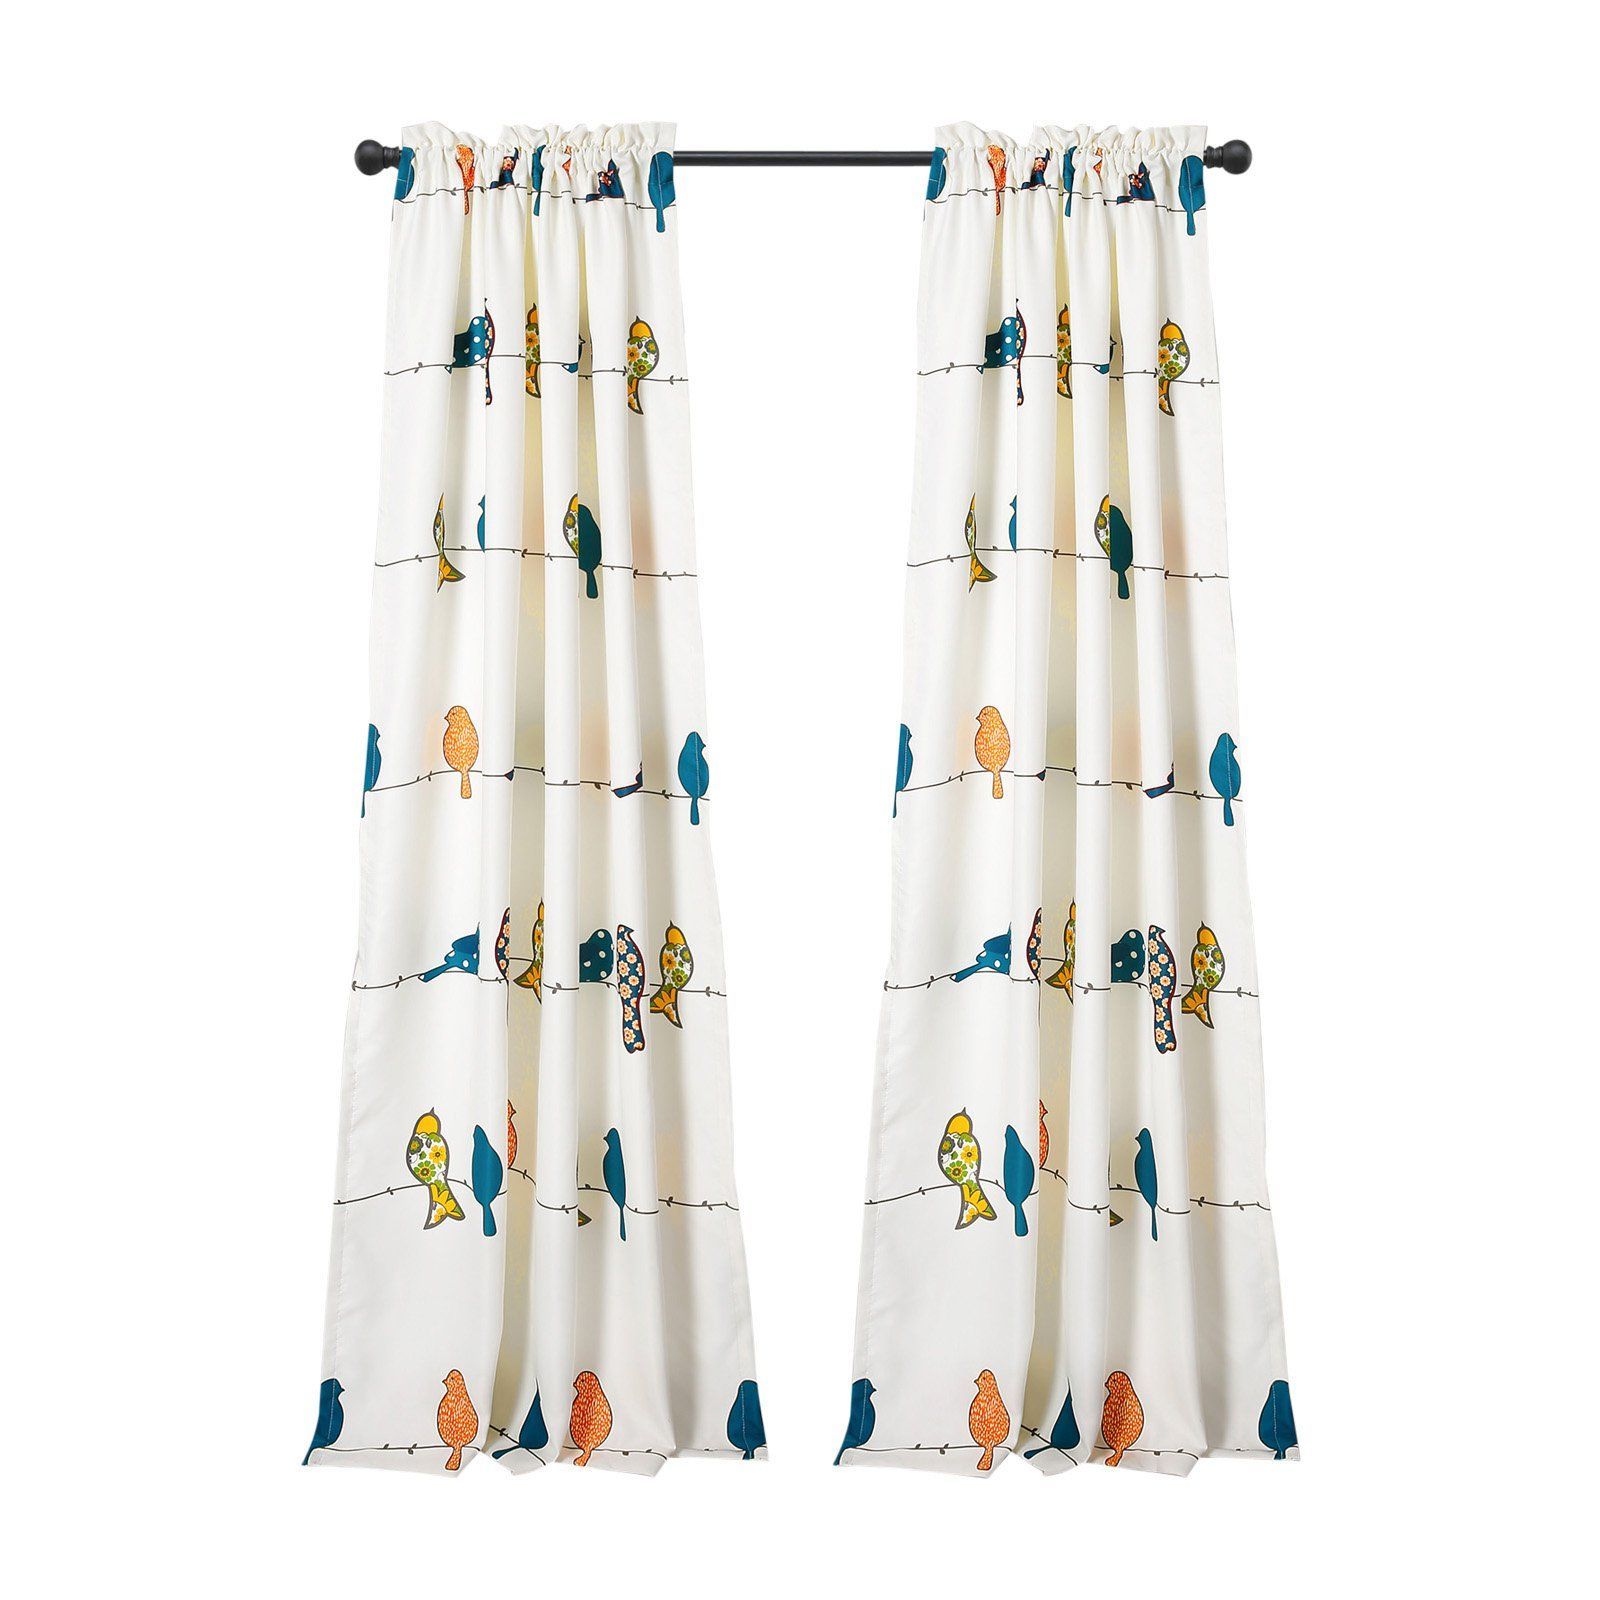 Most Current Rowley Birds Room Darkening Curtain Panel Pairs Intended For Lush Decor Rowley Birds Darkening Panel Pair Multicolor In (View 10 of 20)